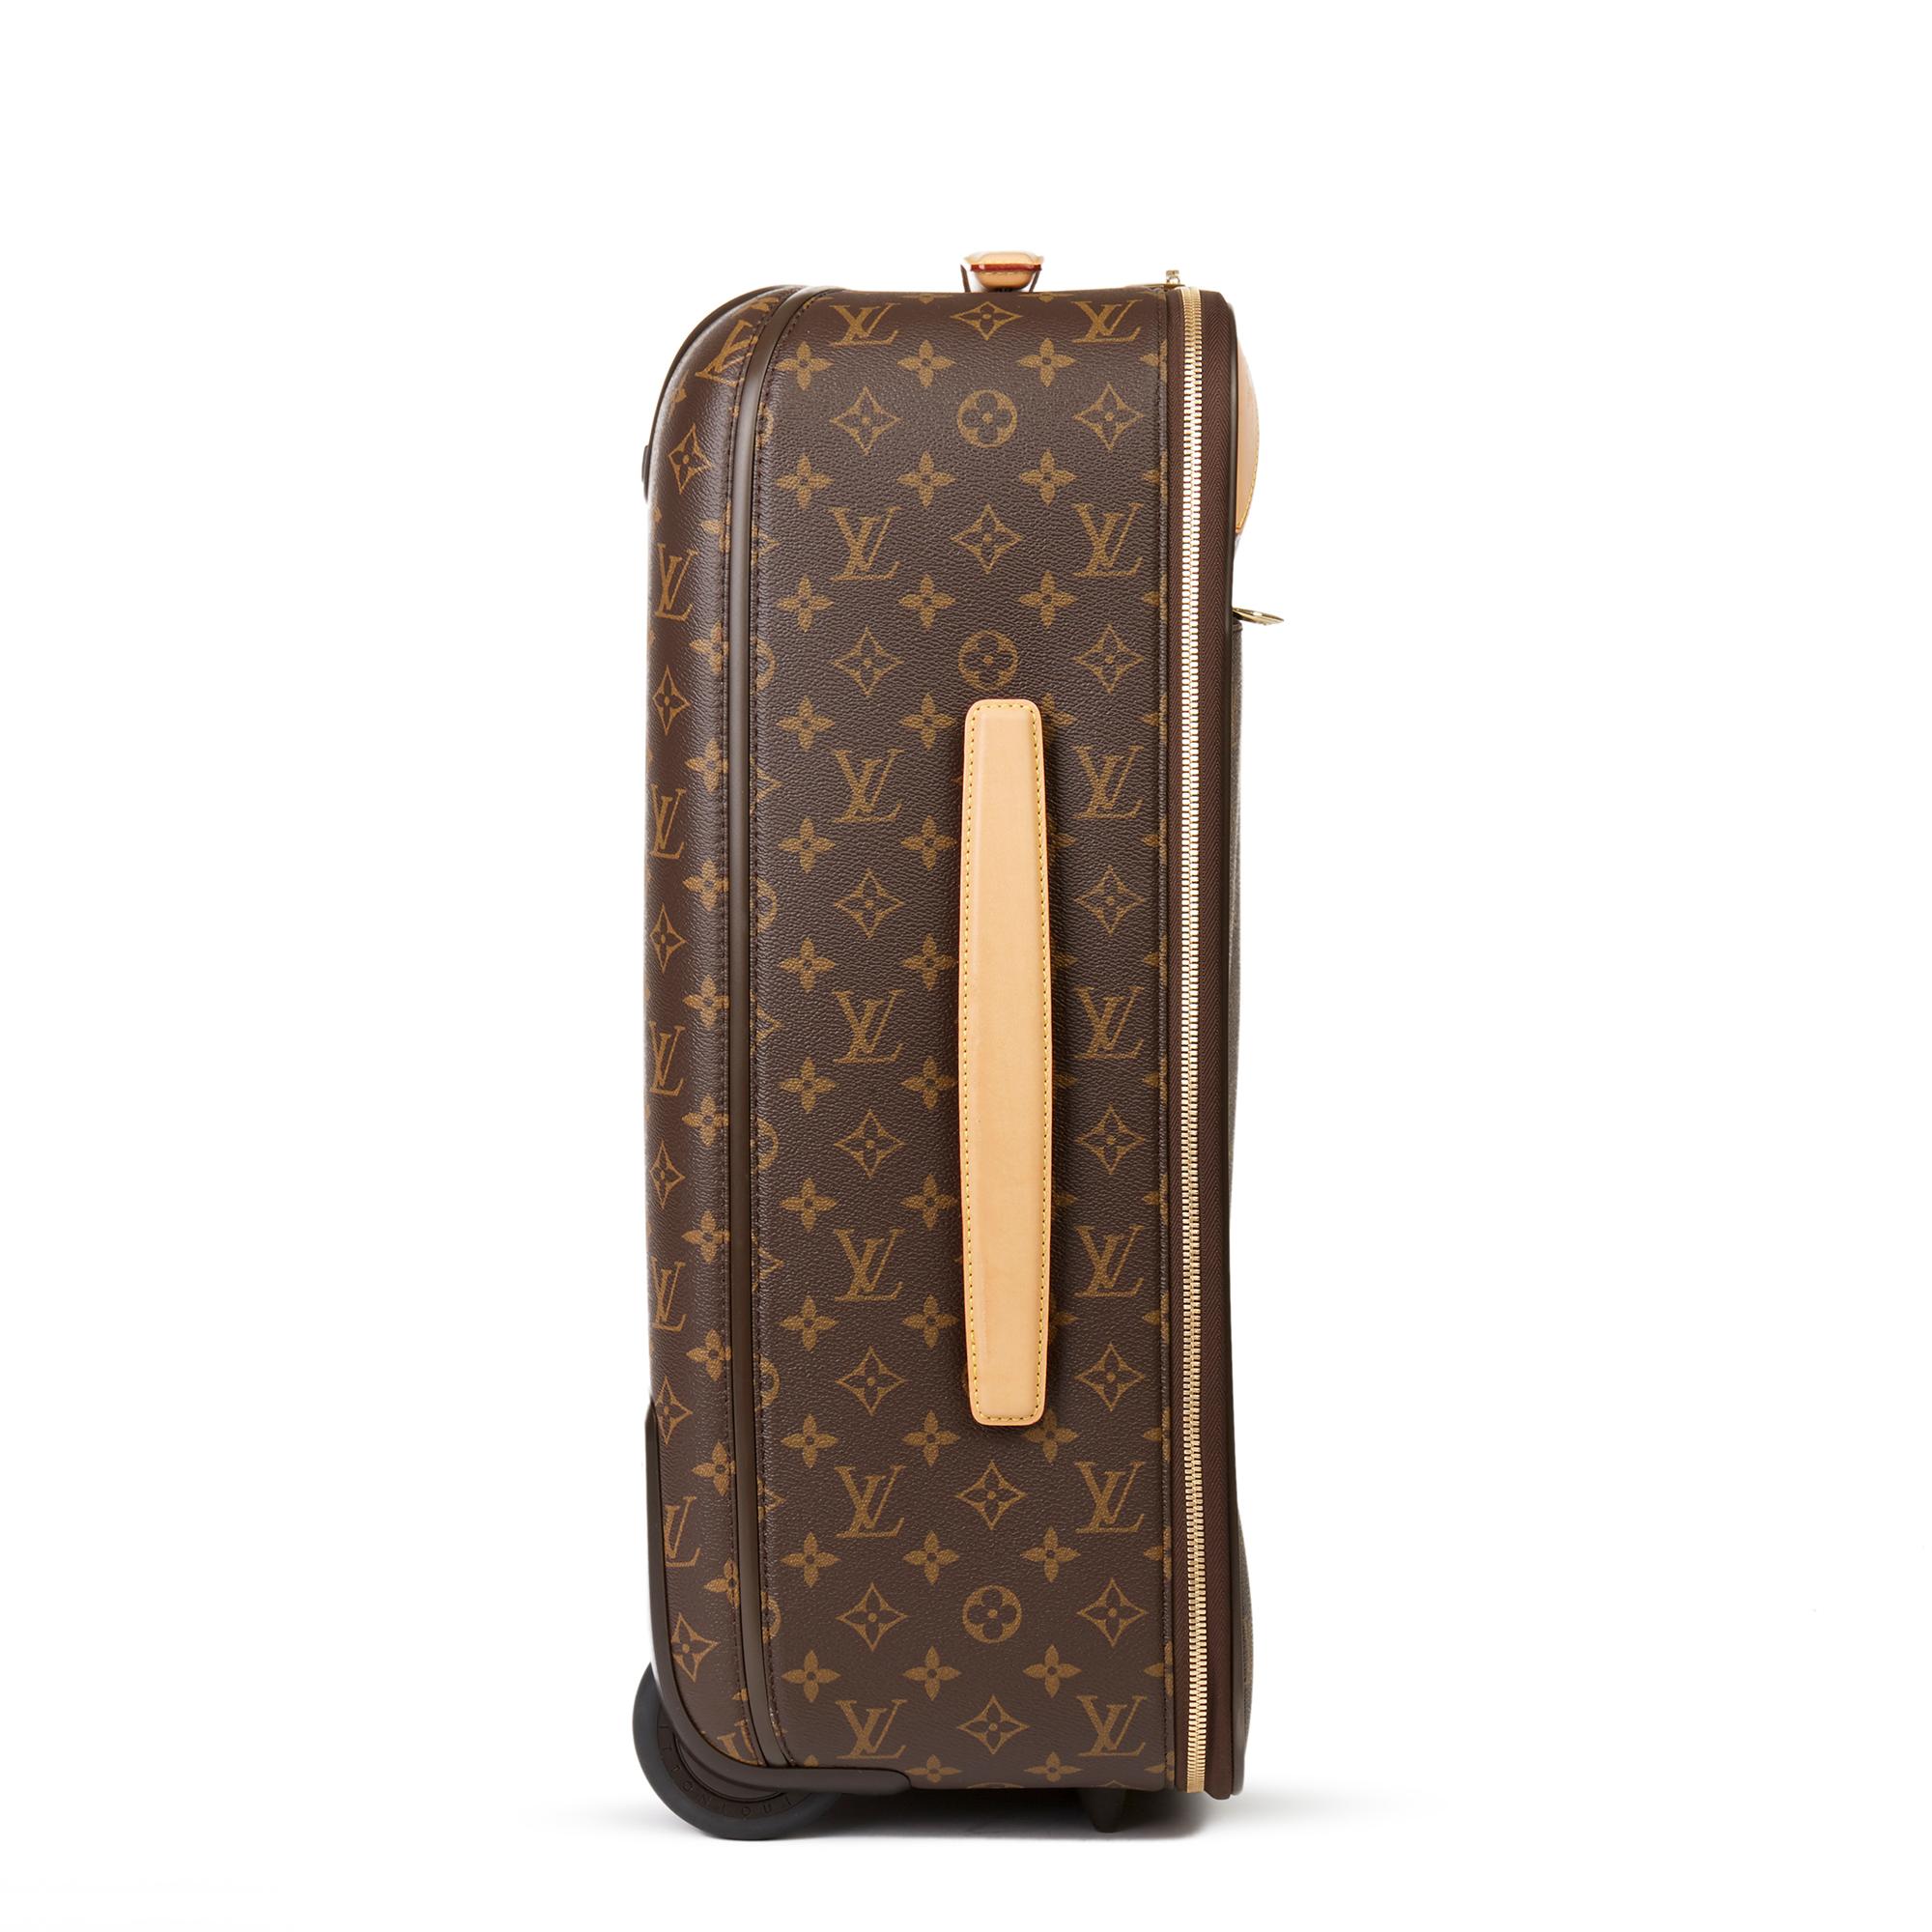 LOUIS VUITTON
Brown Monogram Coated Canvas Pegase 50 

Xupes Reference: HB3301
Serial Number: DR2105
Age (Circa): 2015
Accompanied By: Protective Case
Authenticity Details: Date Stamp (Made in France) 
Gender: Ladies
Type: Travel

Colour: